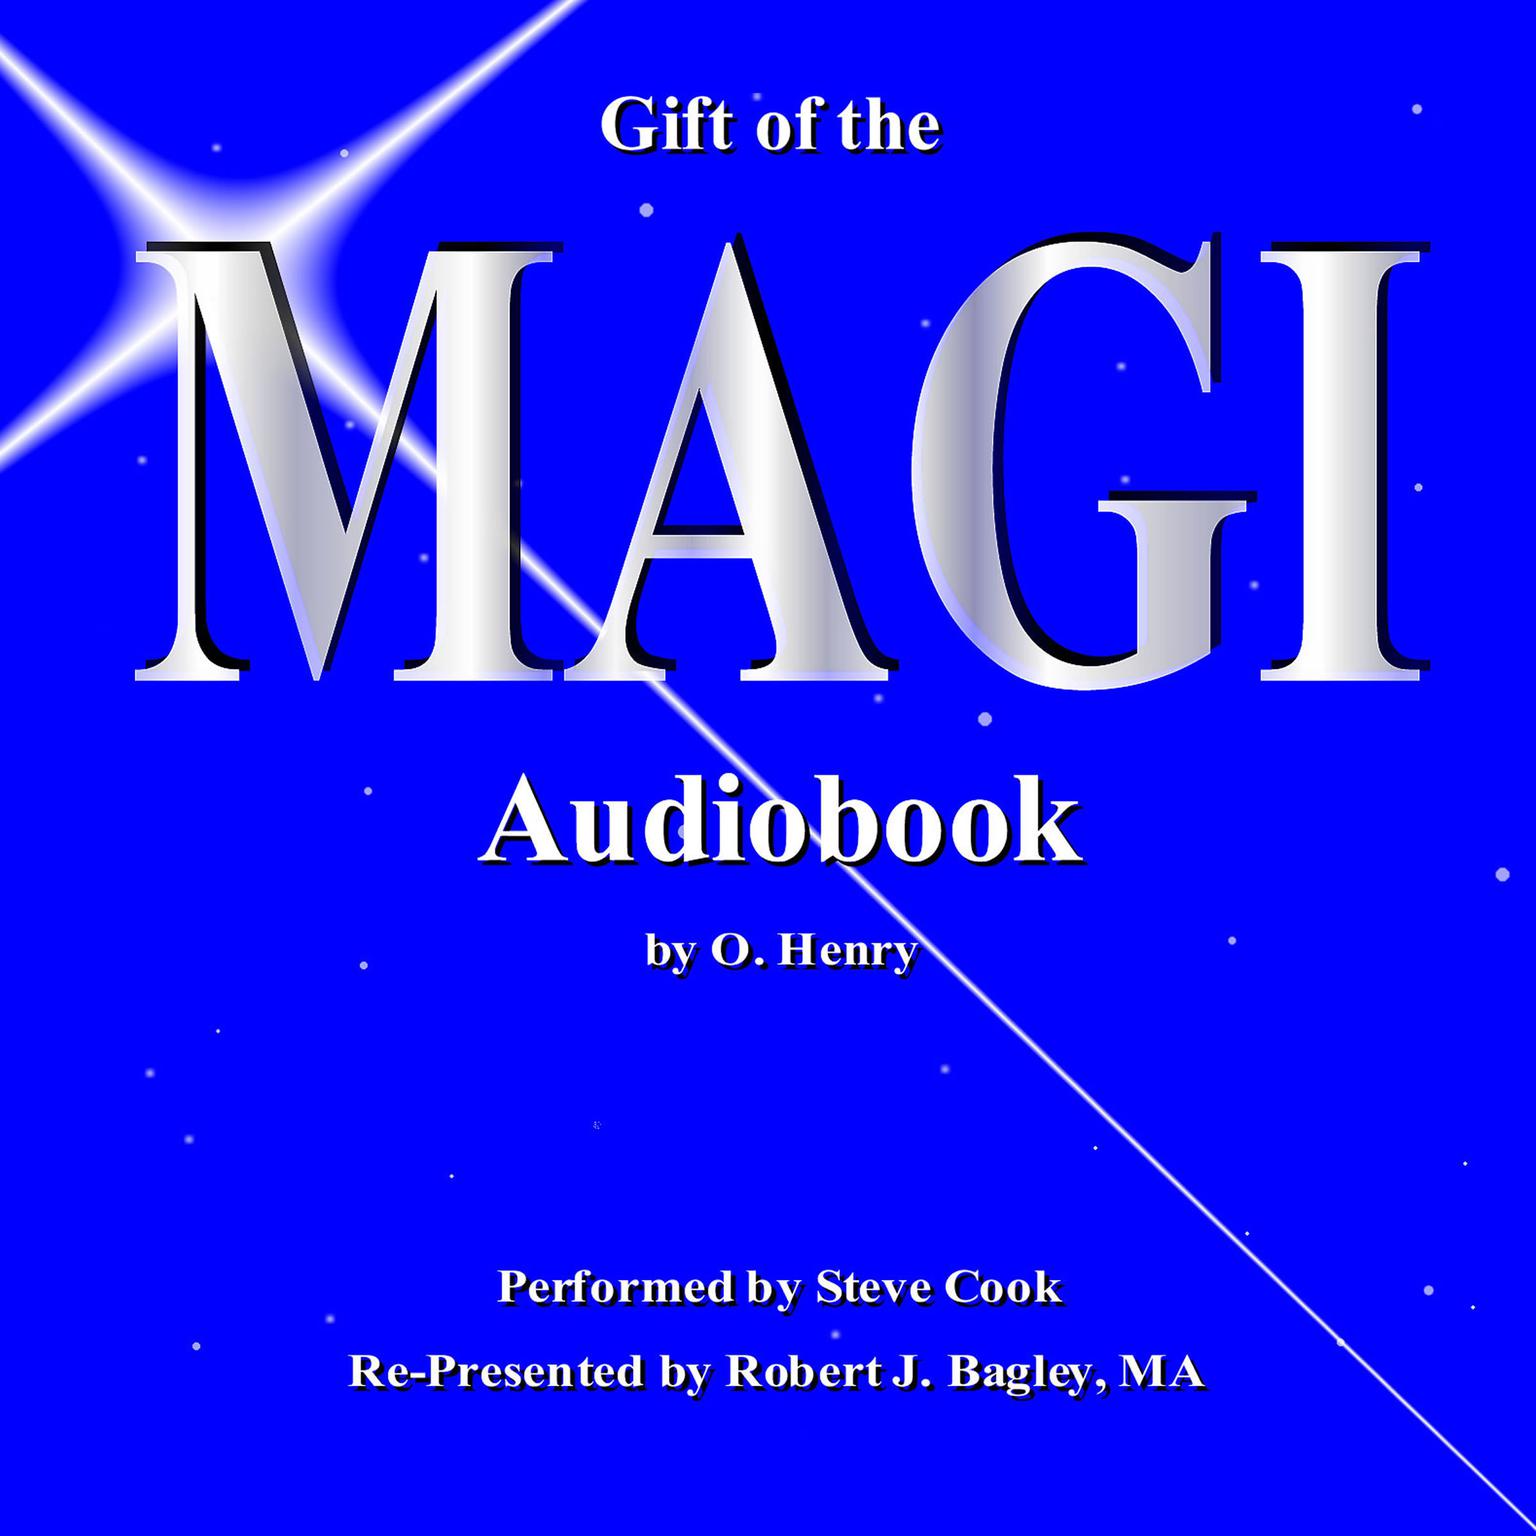 Gift of the Magi Audiobook (Abridged) (Abridged) Audiobook, by O. Henry